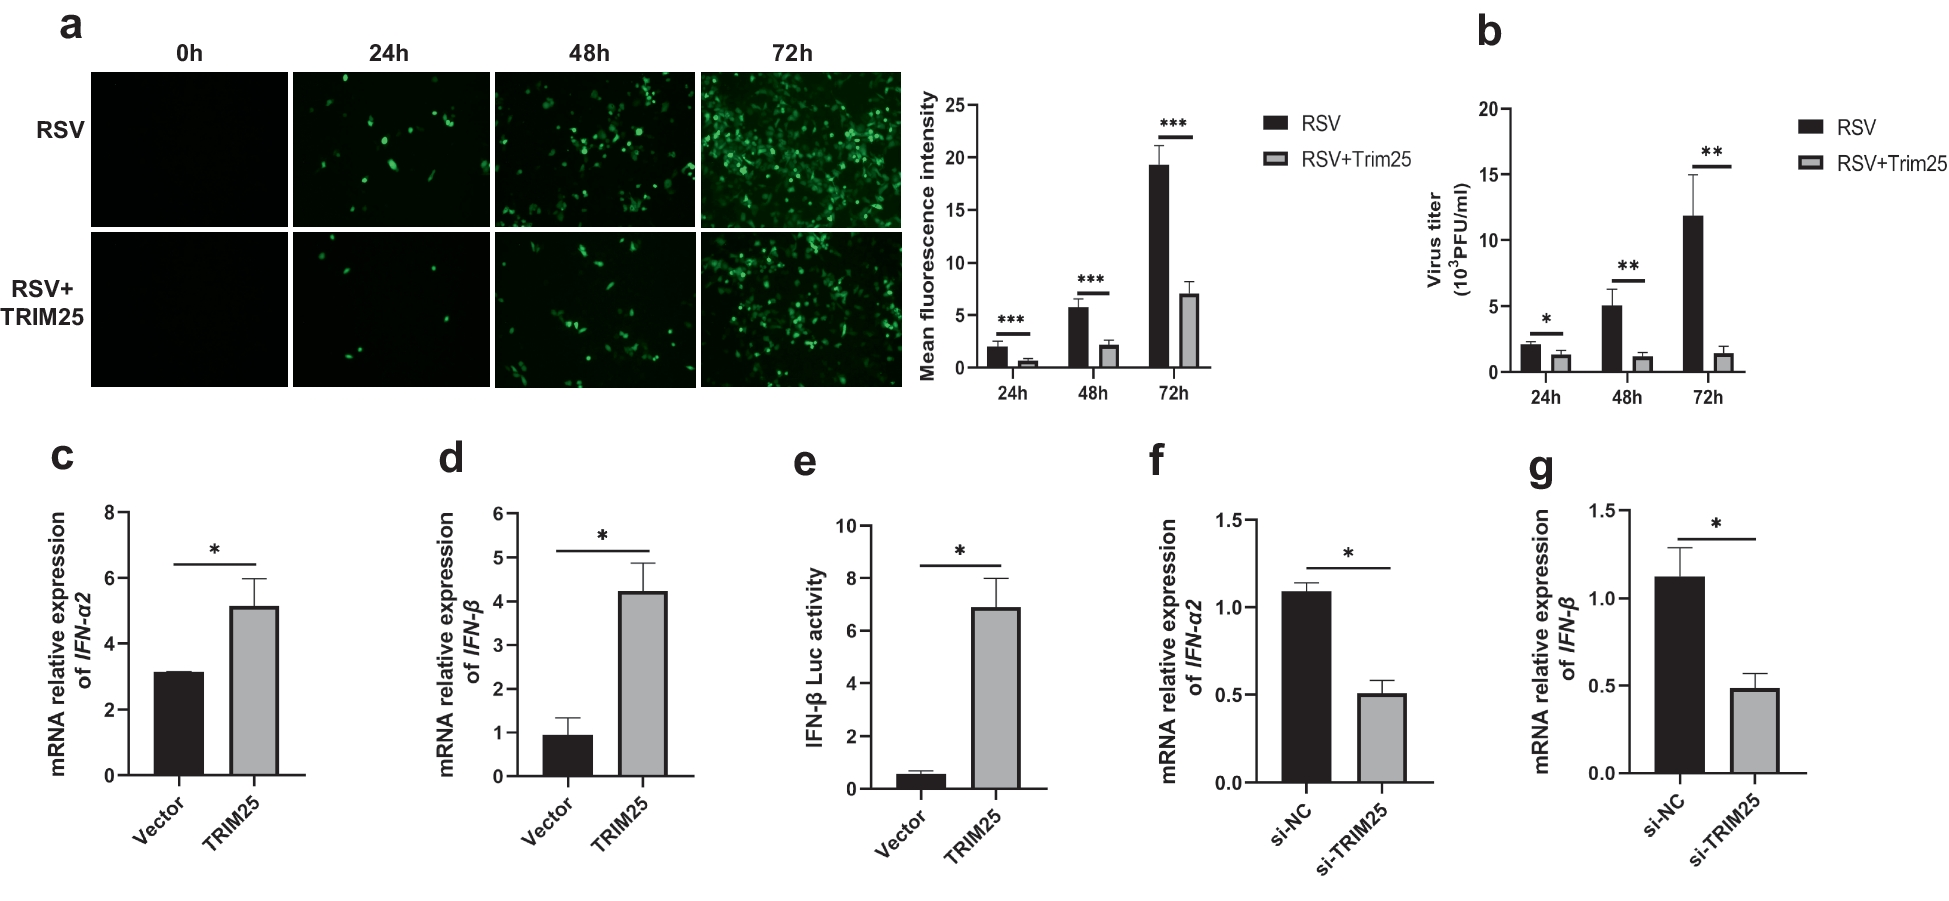 TRIM38 Induced in Respiratory Syncytial Virus-infected Cells Downregulates Type I Interferon Expression by Competing with TRIM25 to Bind RIG-I